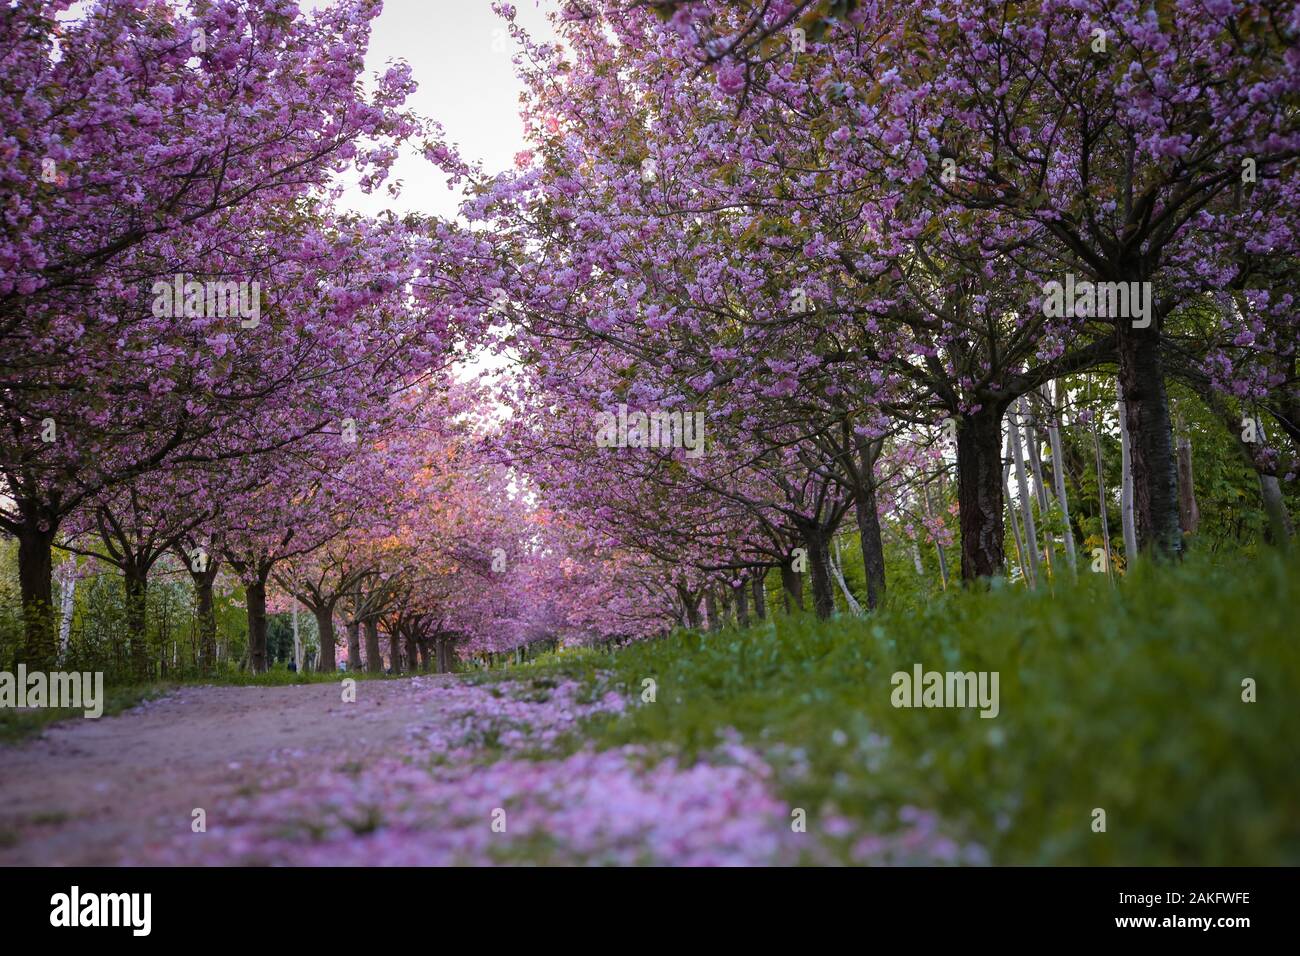 Rows of beautifully blossoming cherry trees on a green lawn Stock Photo